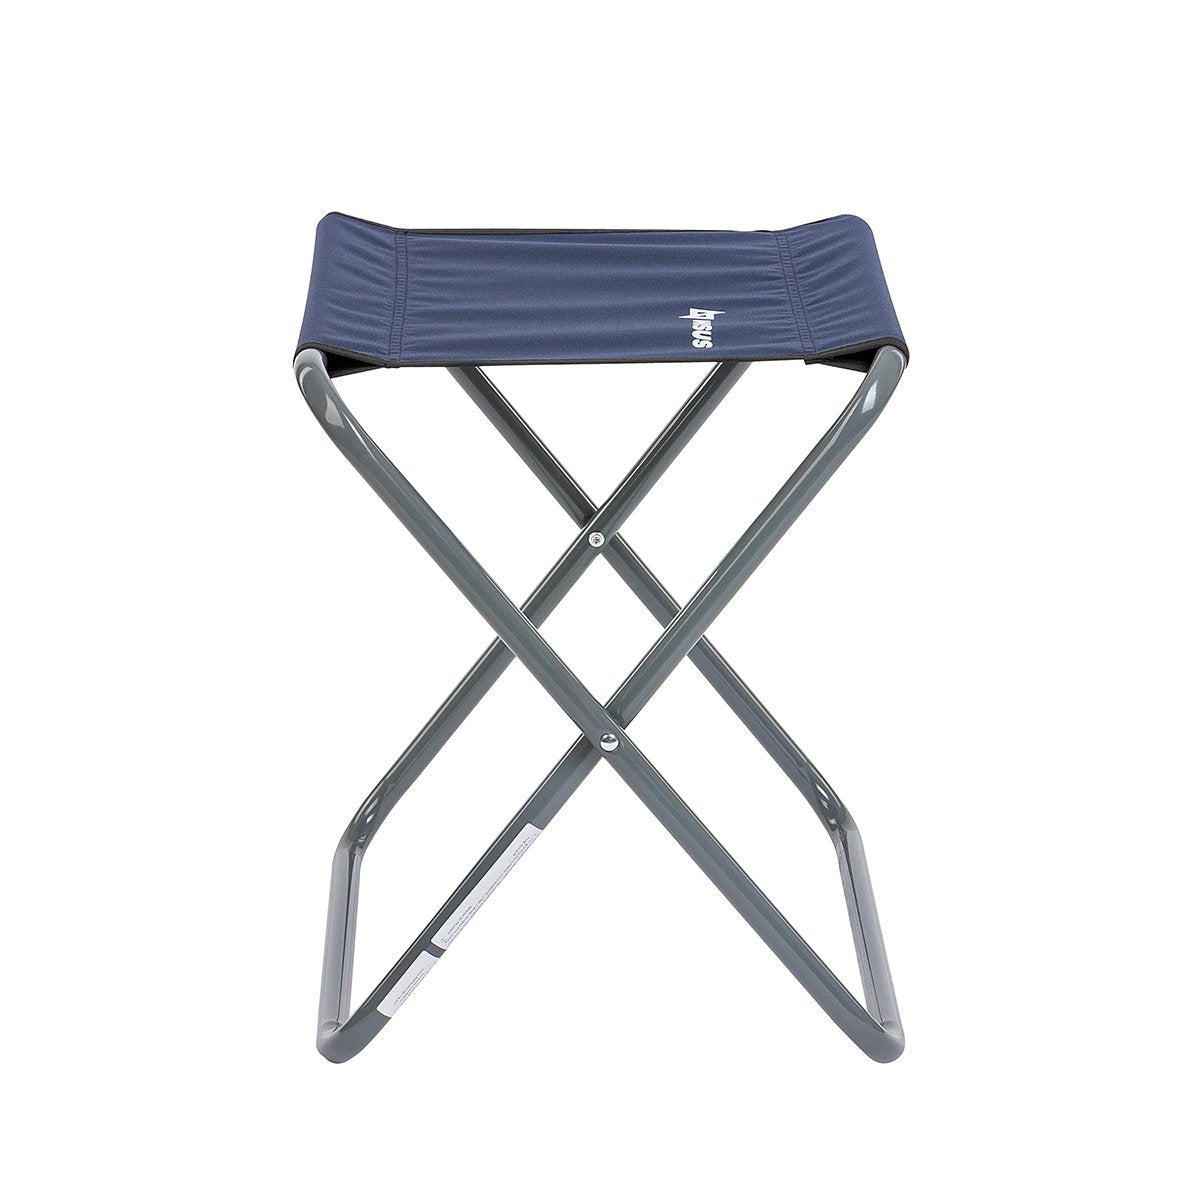 Blue camping stool sideview